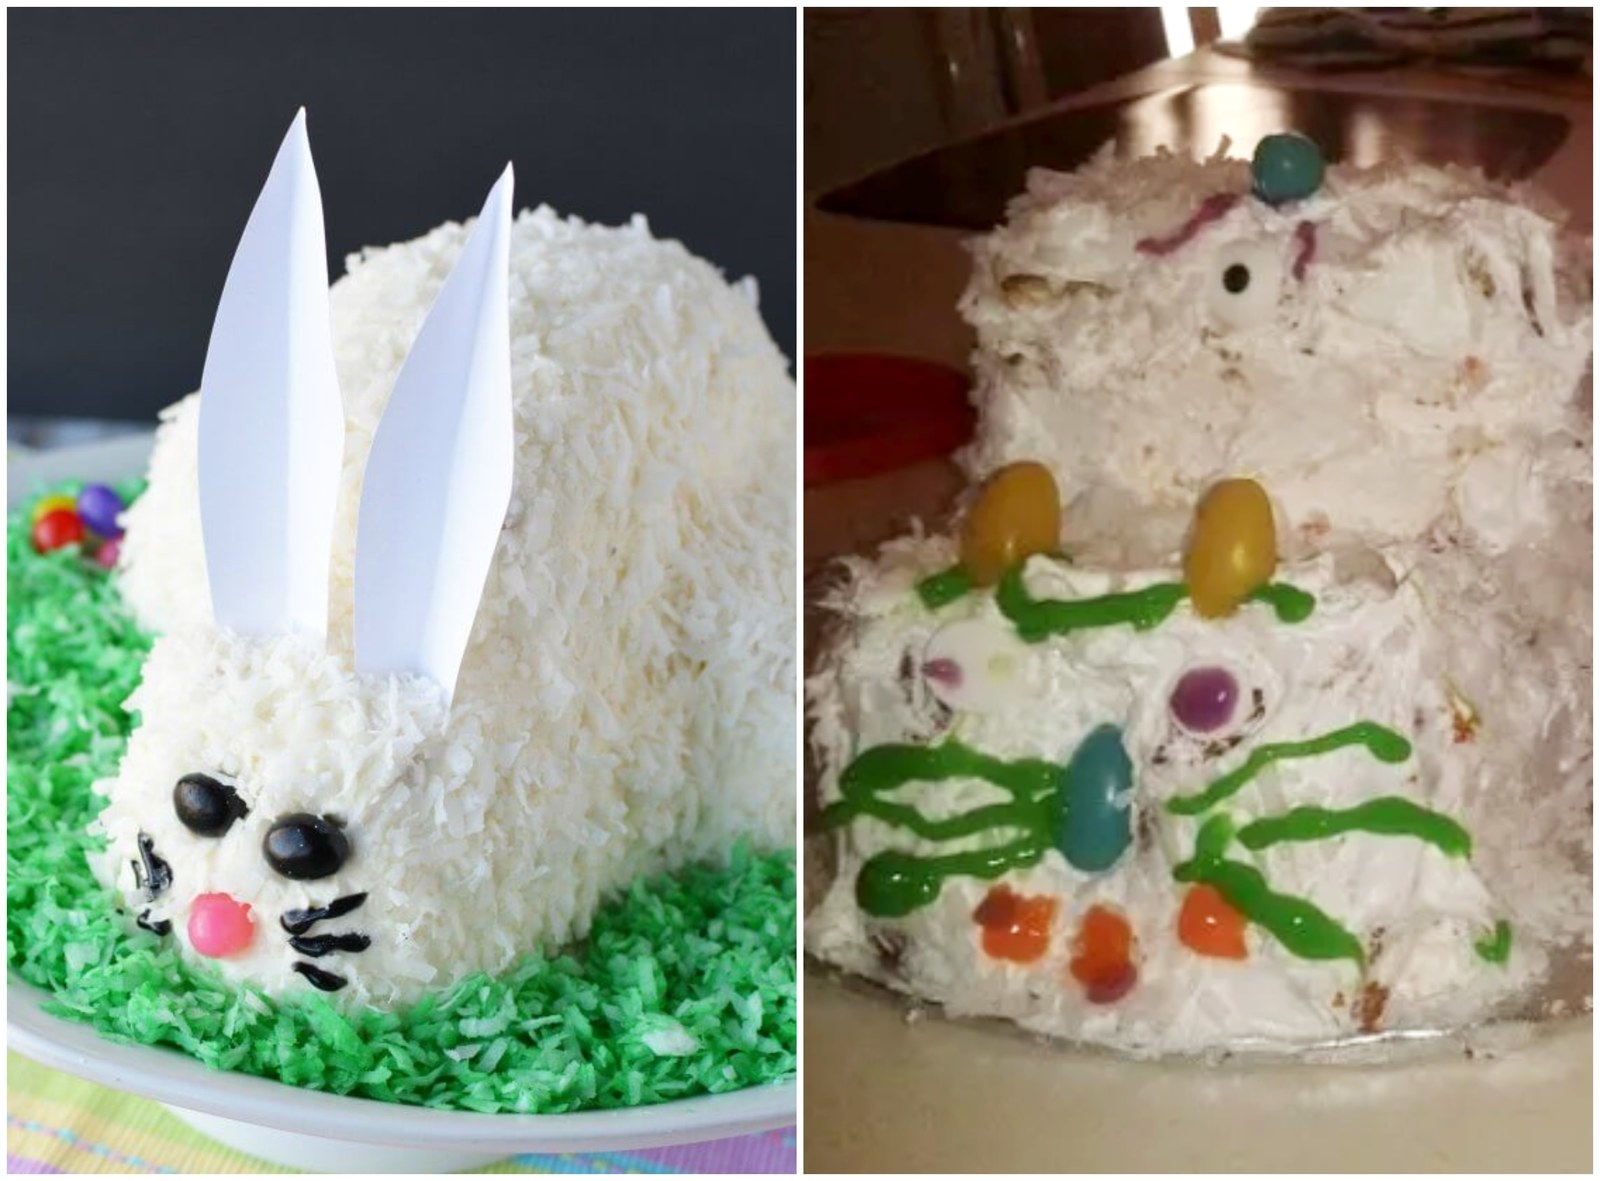 Cake Decorating: Everything You've Ever Wanted to Know | Cozymeal